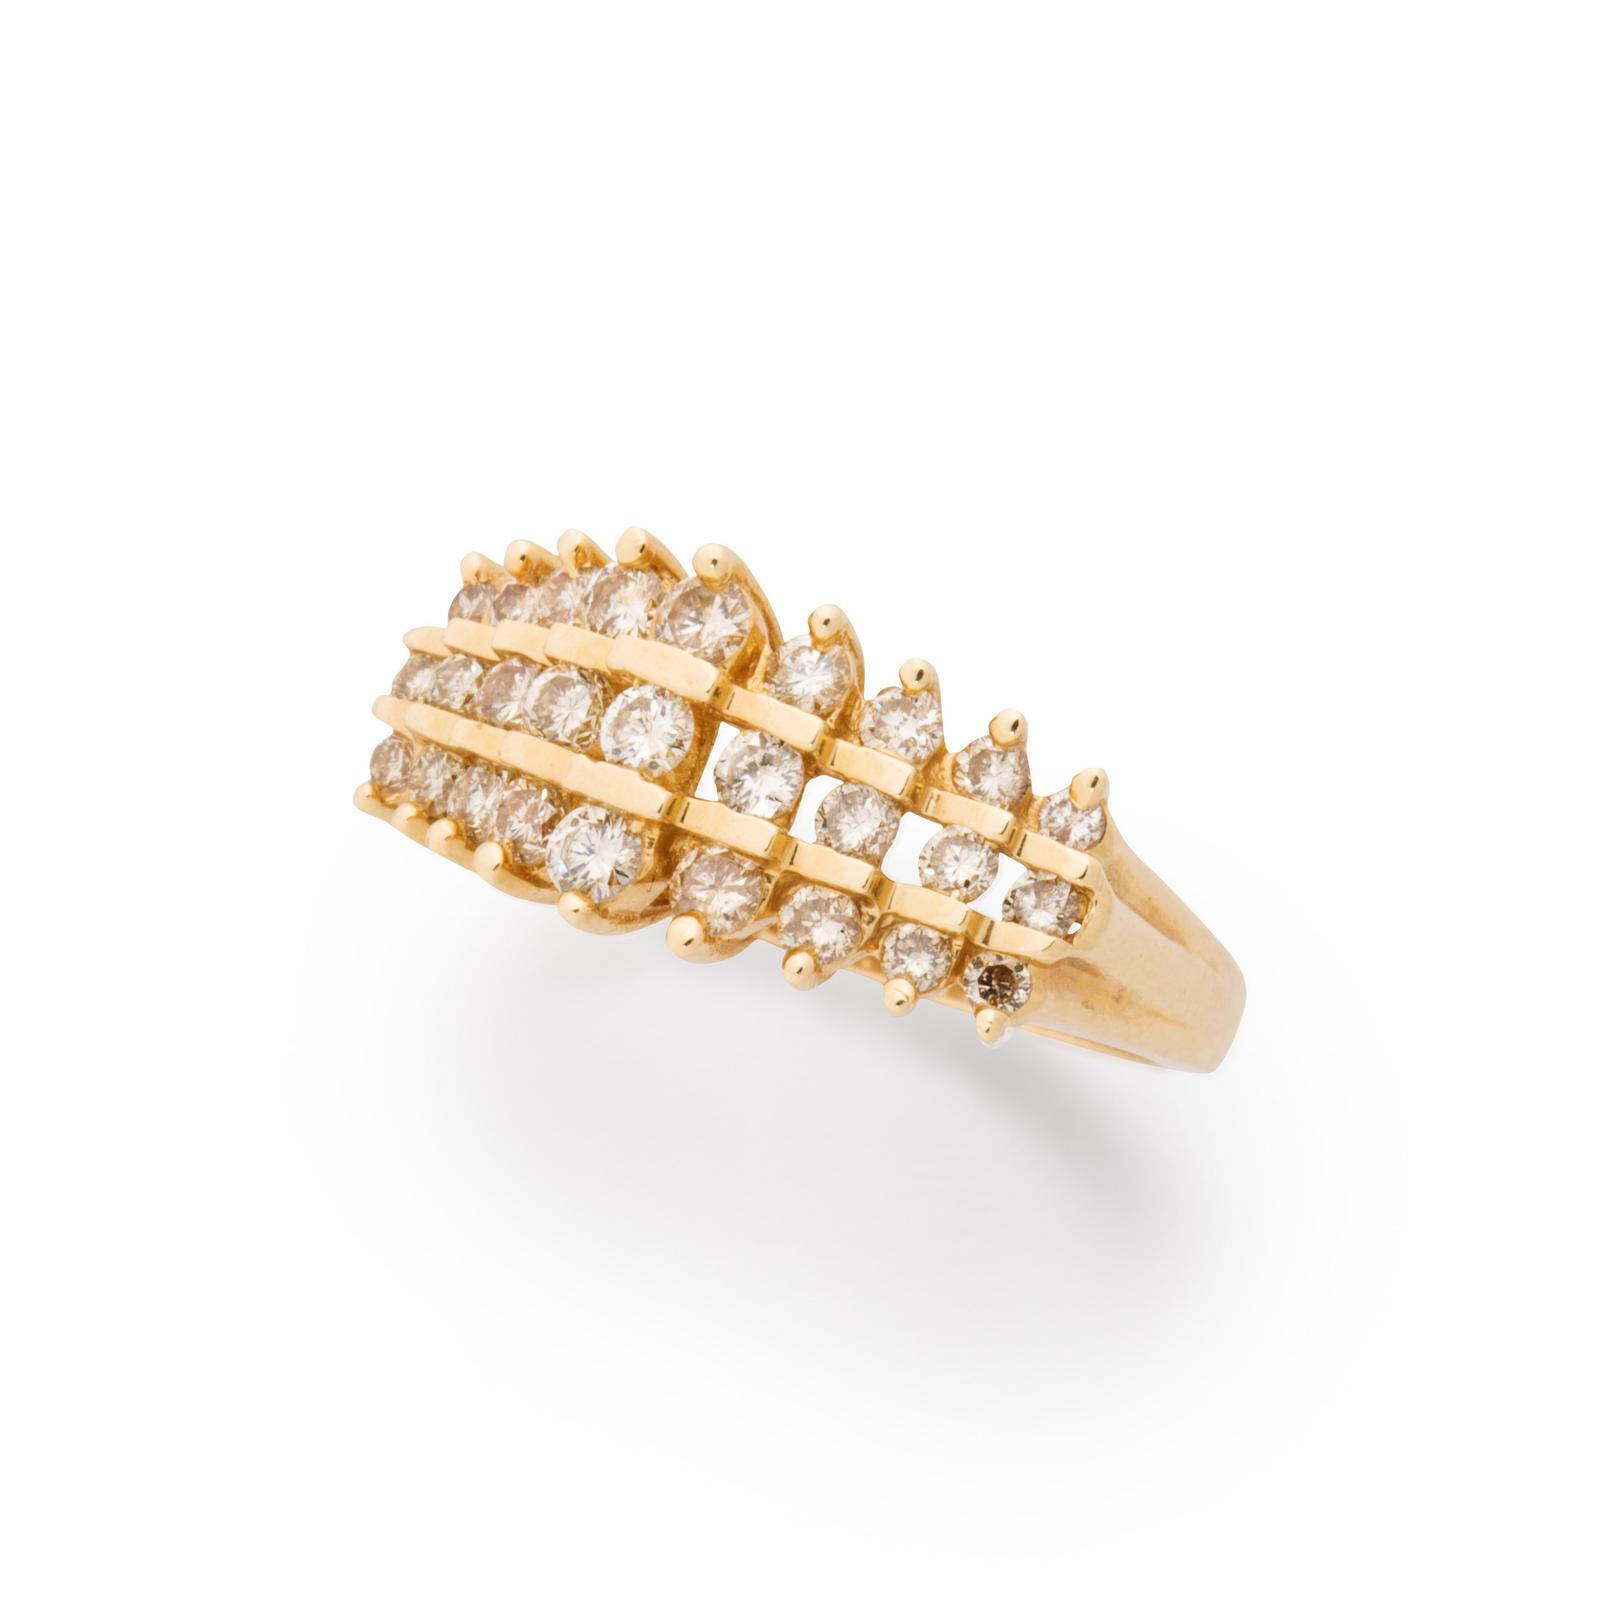 A diamond and fourteen karat gold ring | Clars Auction Gallery